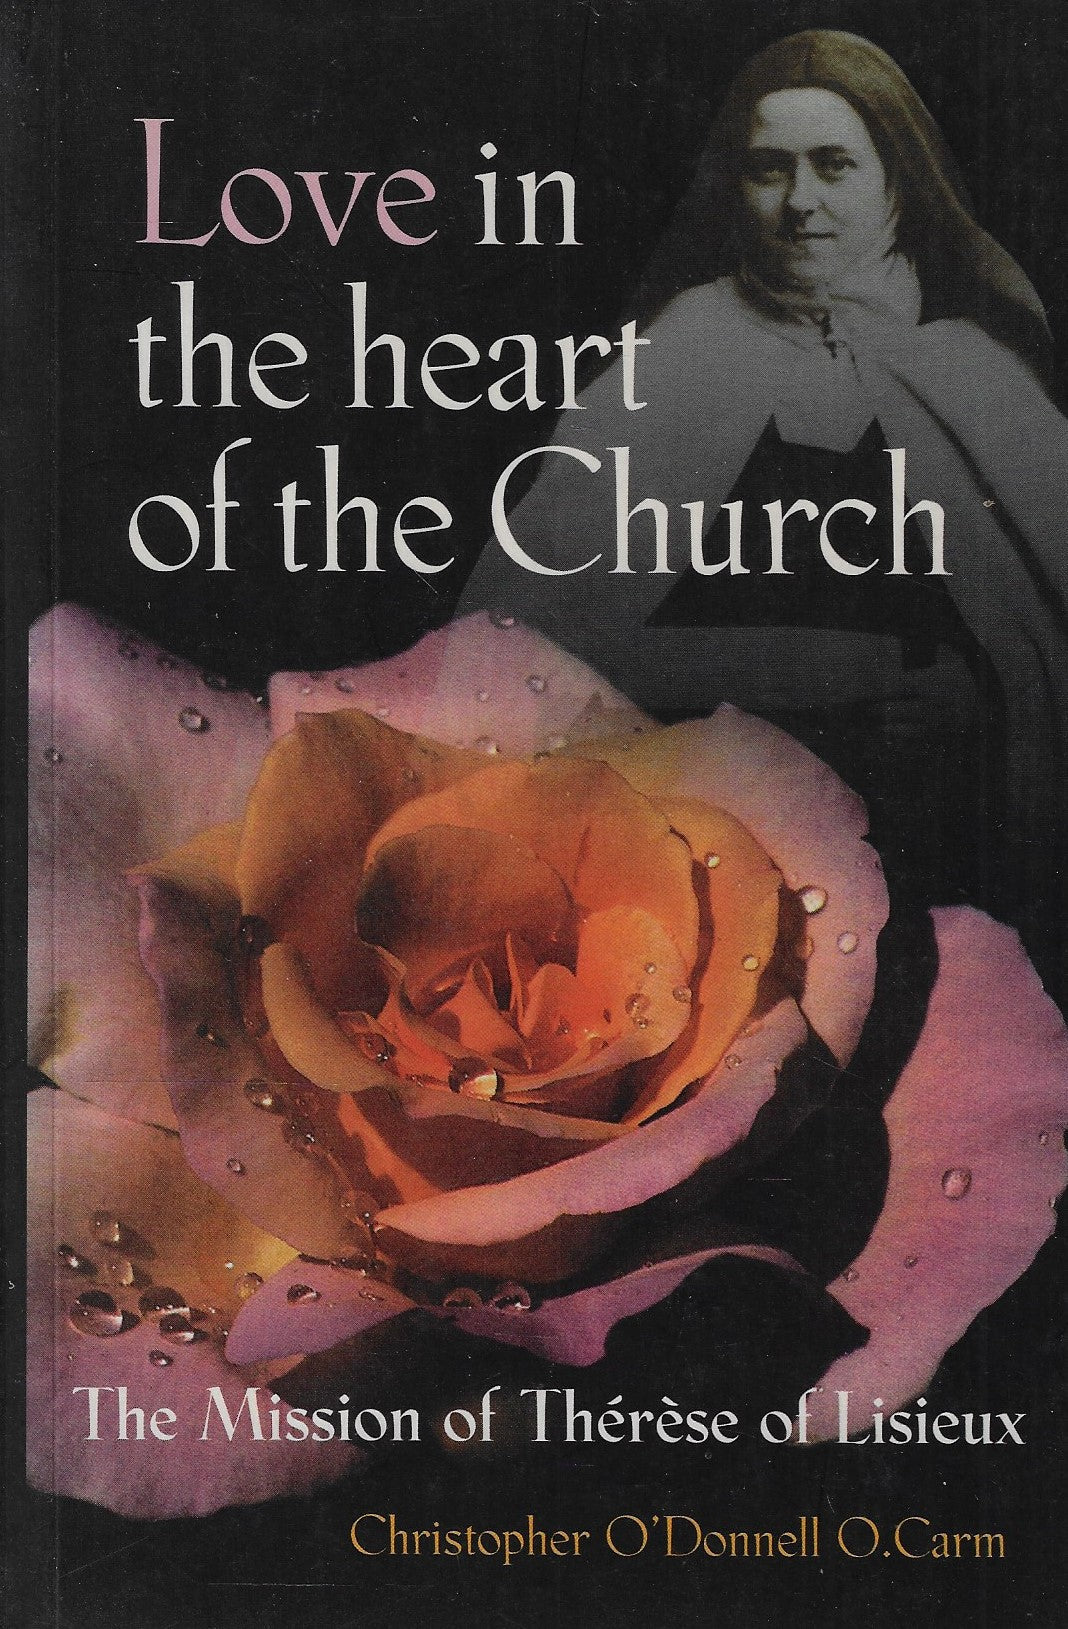 Love in the heart of the church